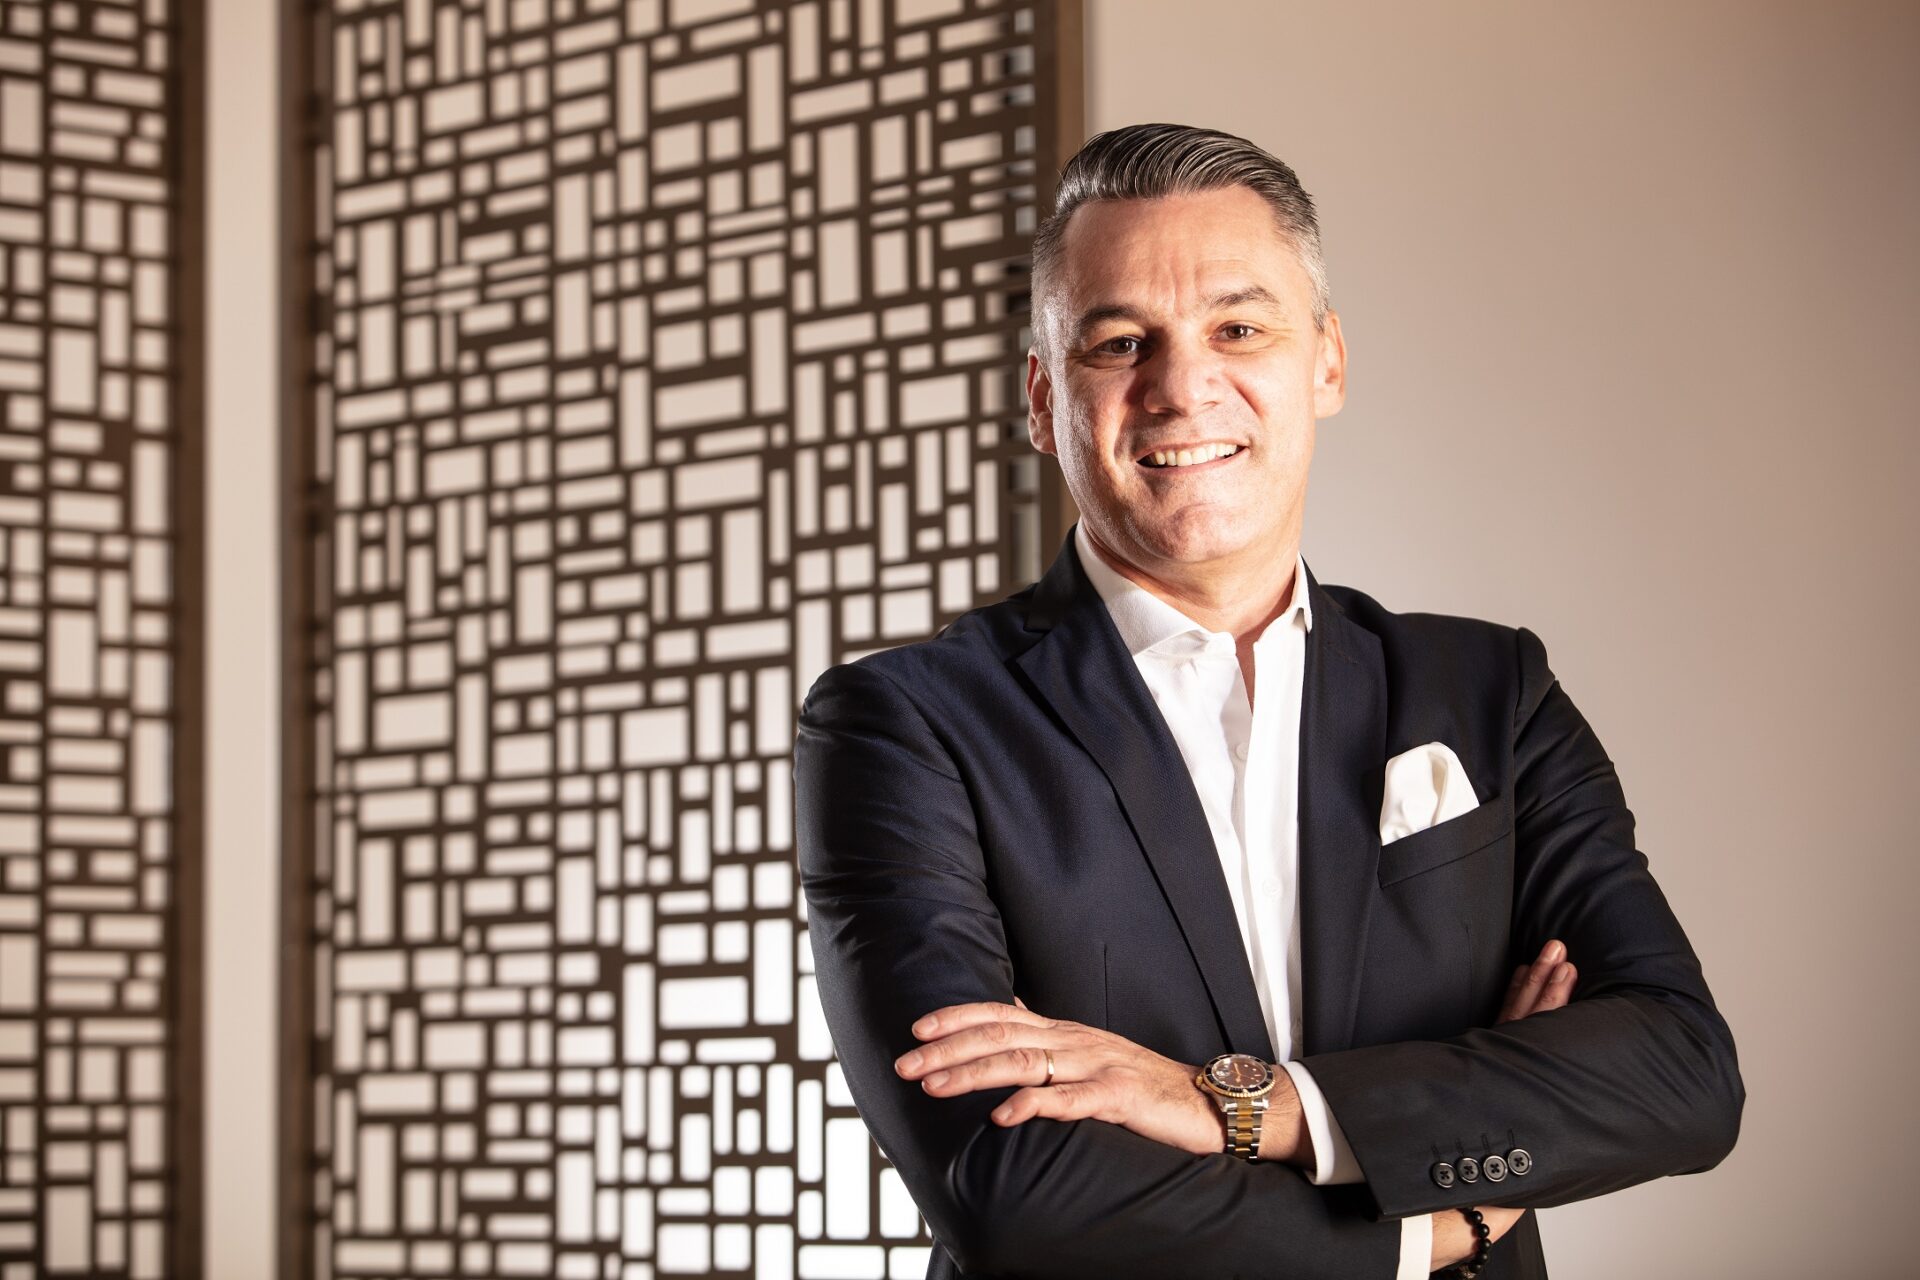 DANIELE VASTOLO, GENERAL MANAGER OF ZULAL WELLNESS RESORTS COMMENTS ON ‘WORLD’S BEST NEW WELLNESS RETREAT 2020’